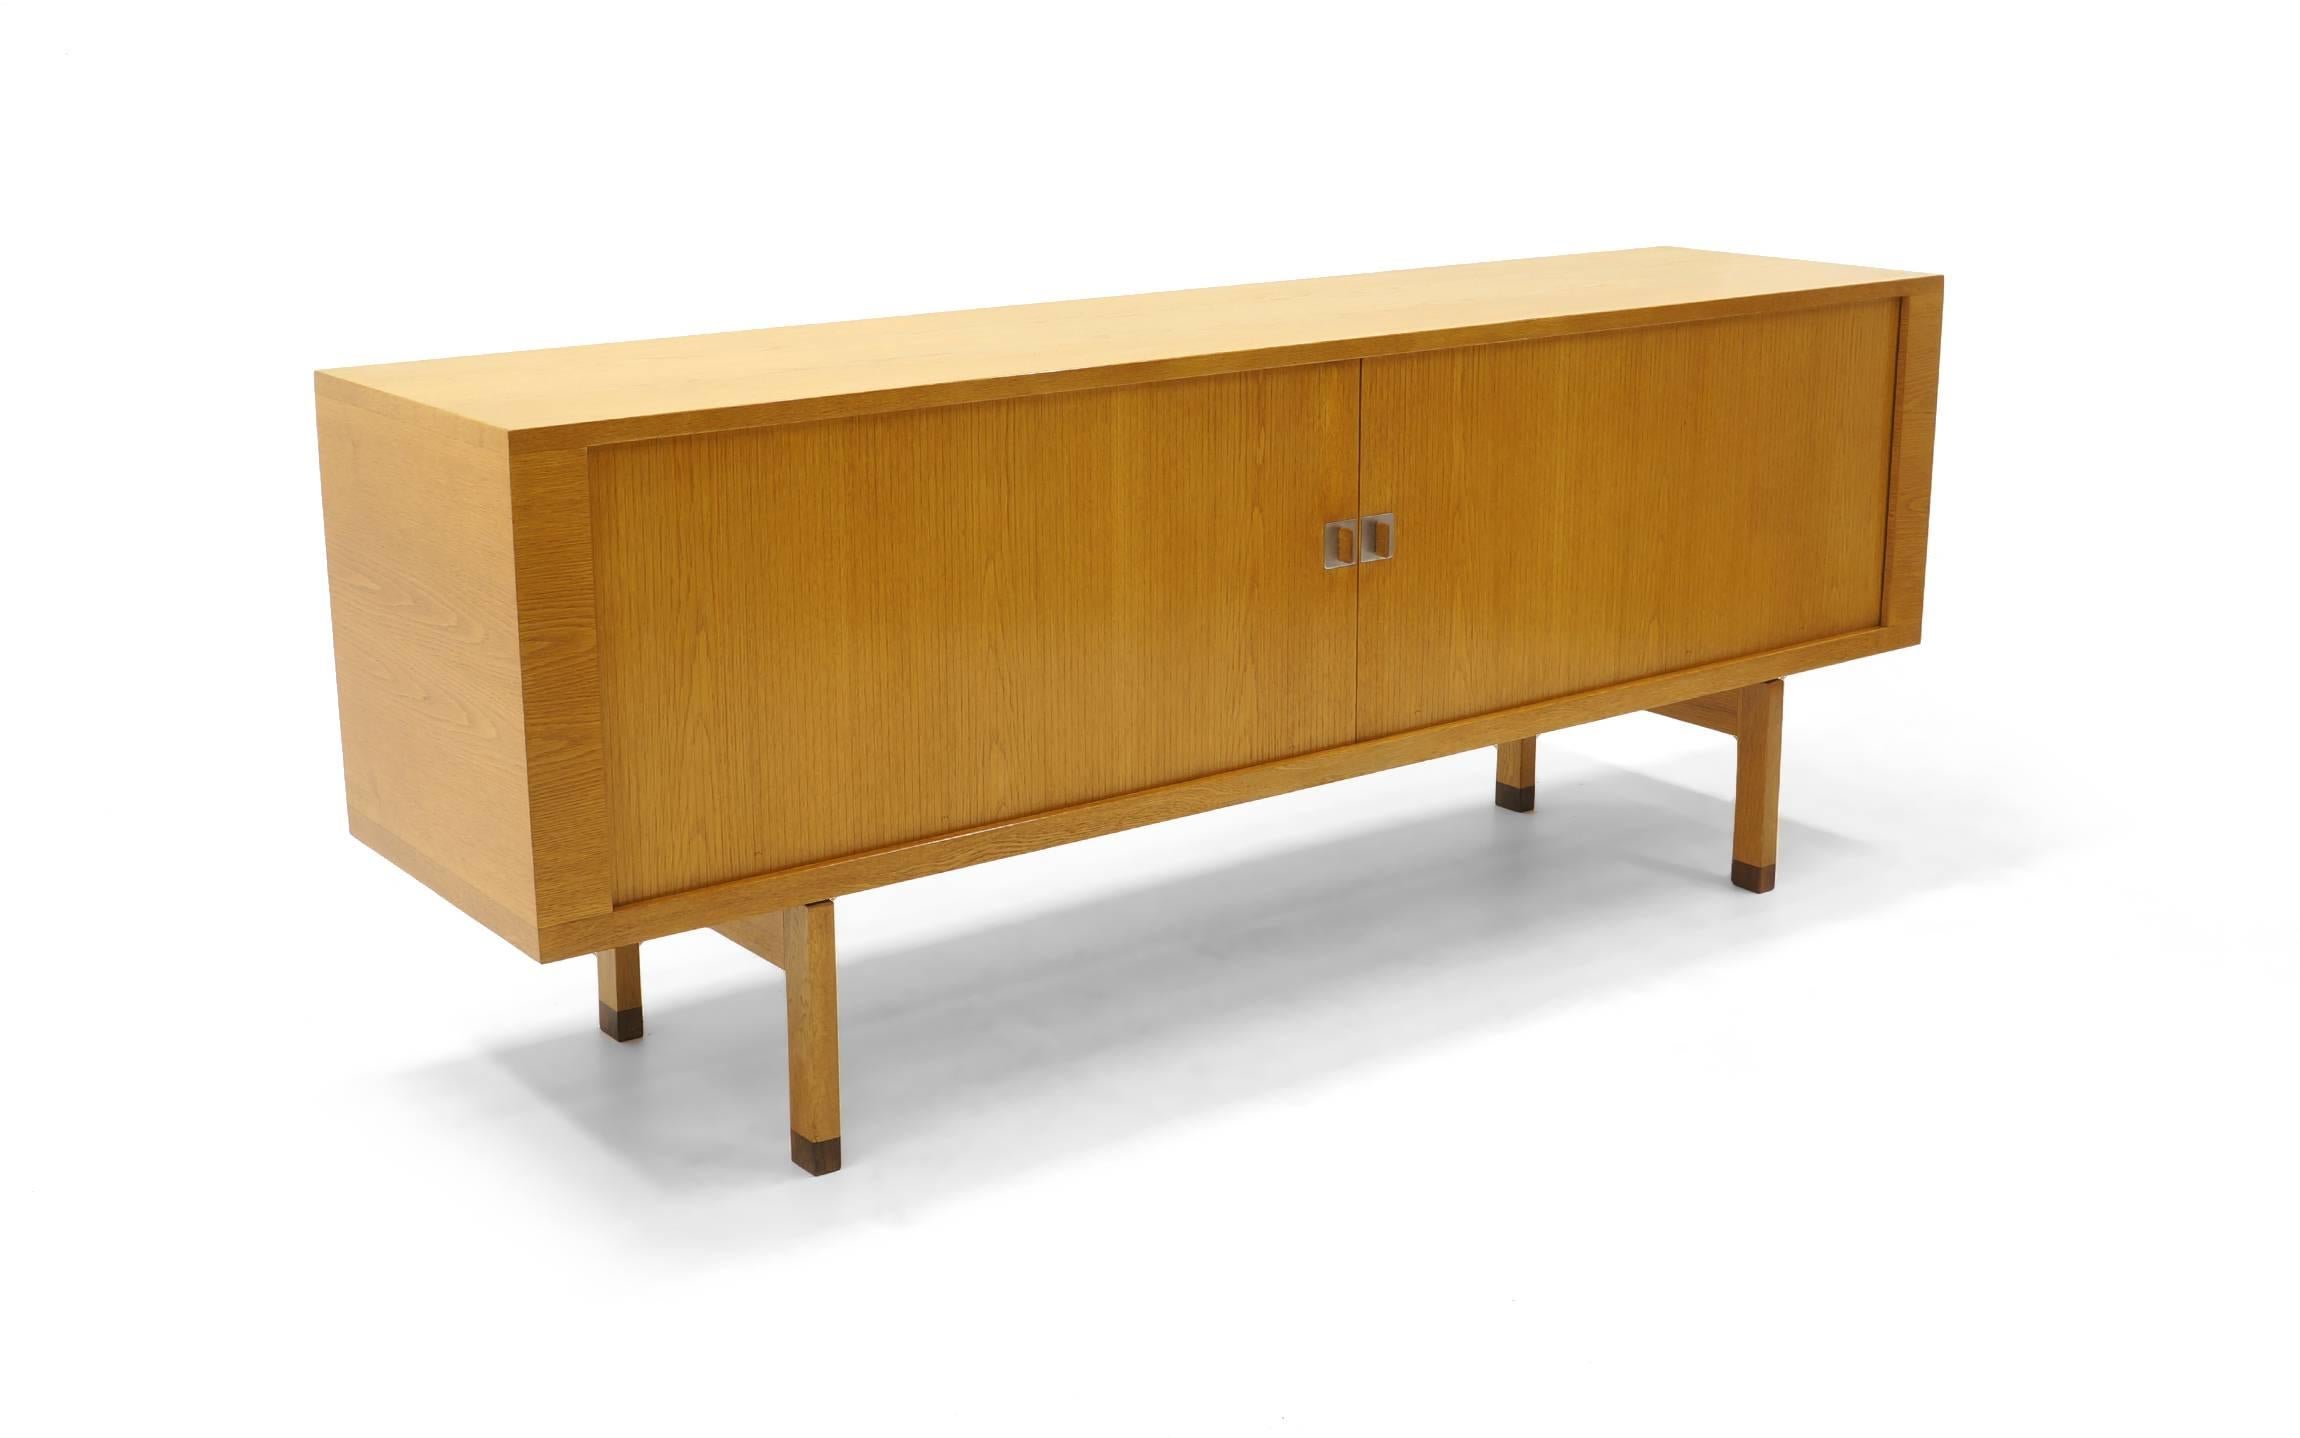 Hans Wegner president credenza. Disappearing tambour doors. Oak inside and out. Excellent example of this design.